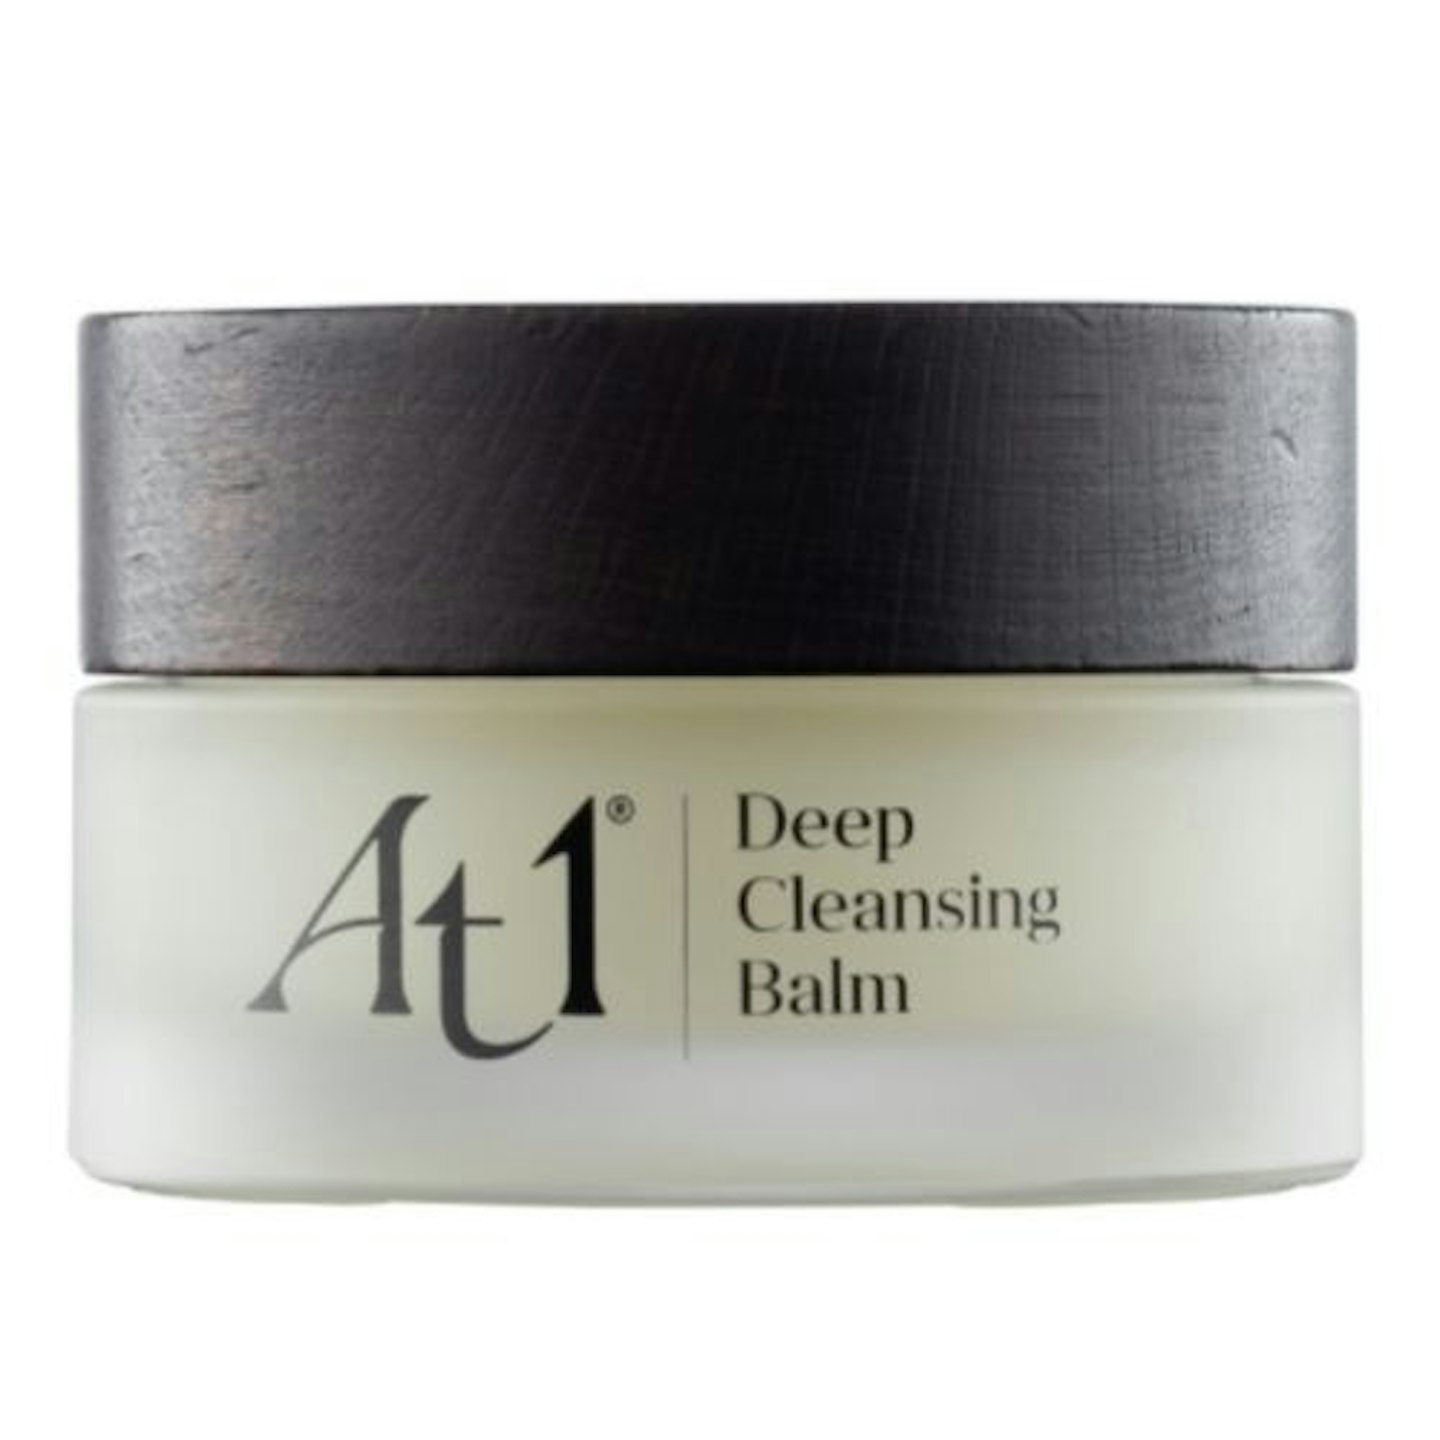 At1 Deep Cleansing Balm